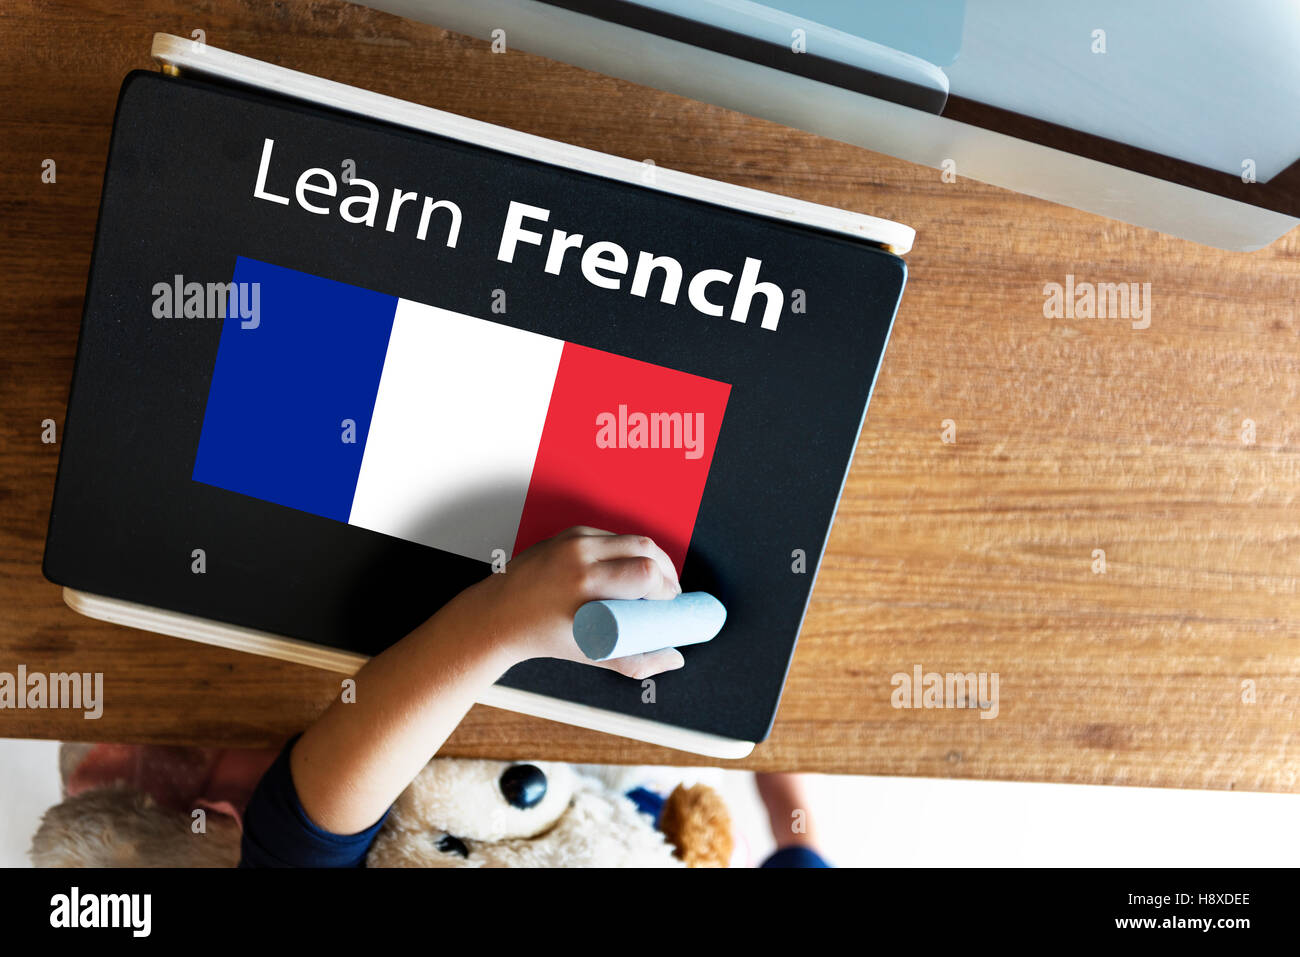 Learn French Language Online Education Concept Stock Photo